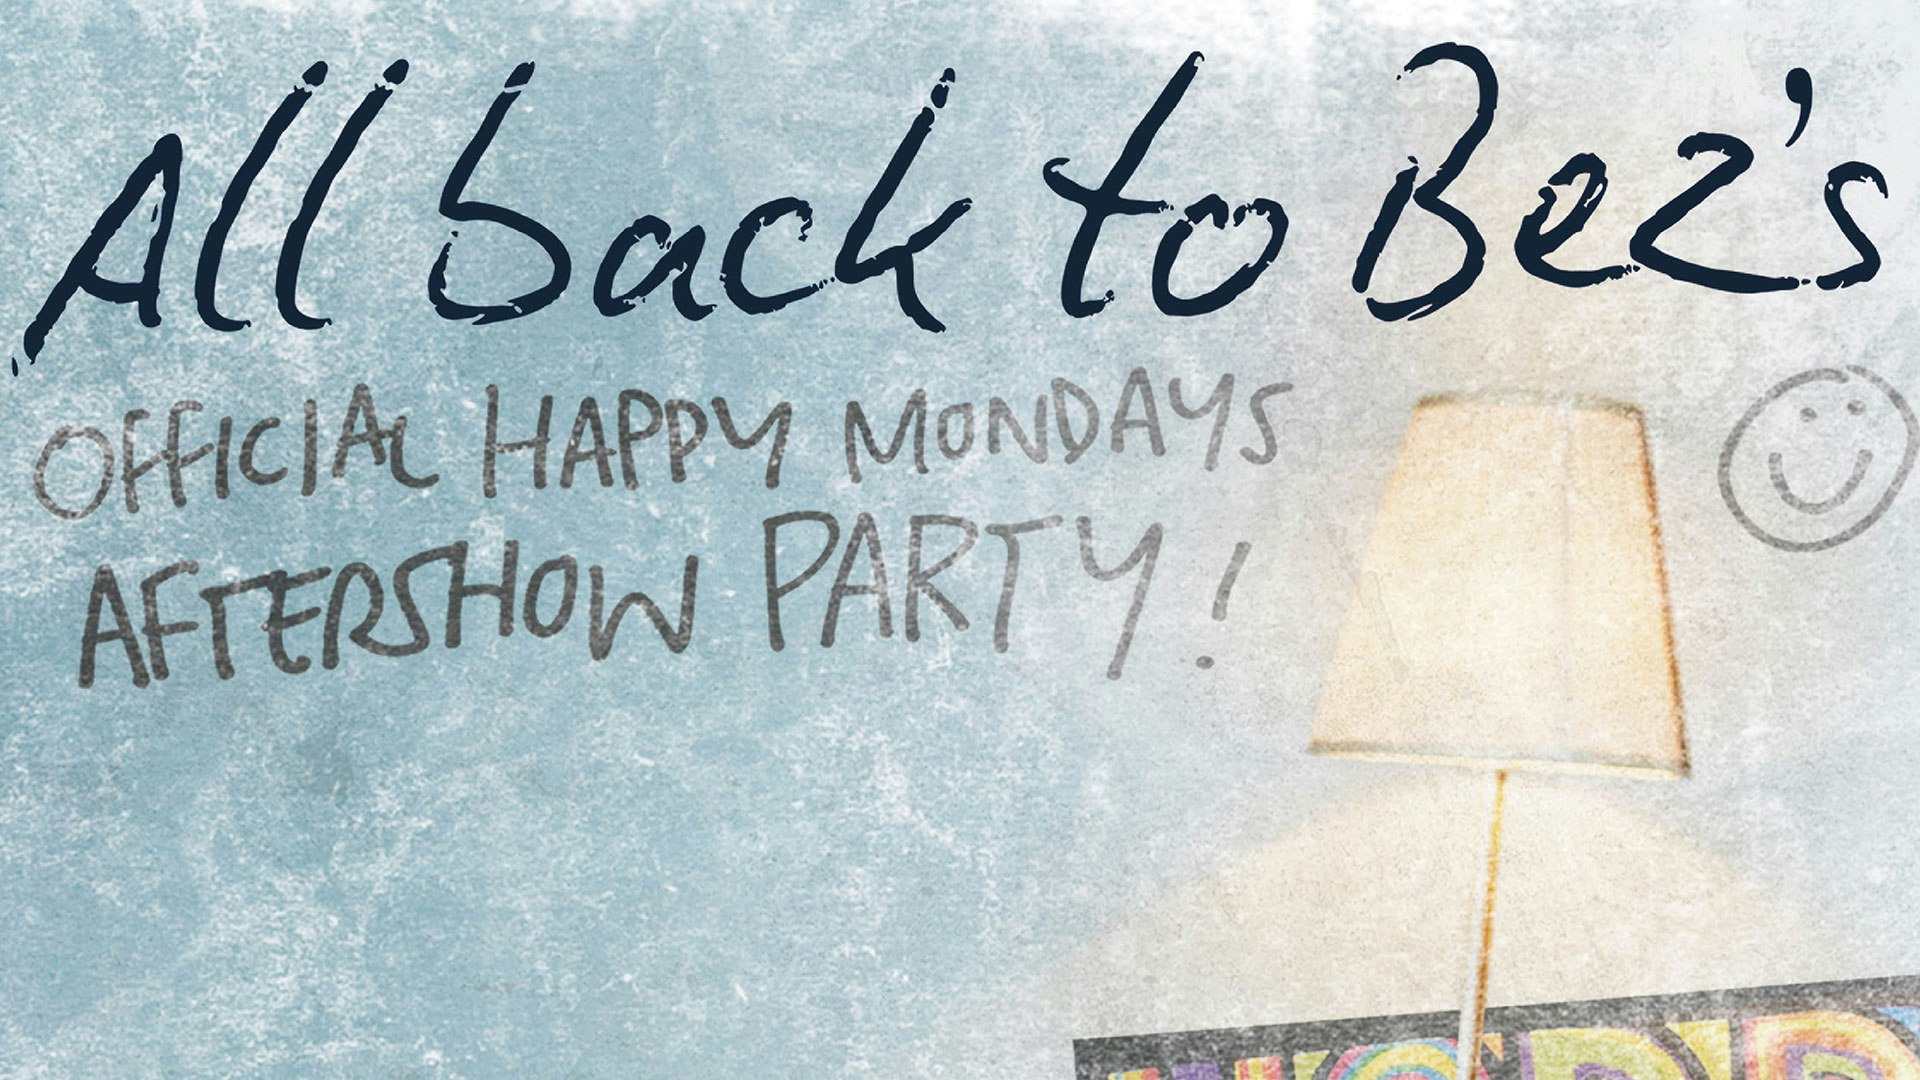 All Back to Bez’s – Official Happy Mondays Aftershow